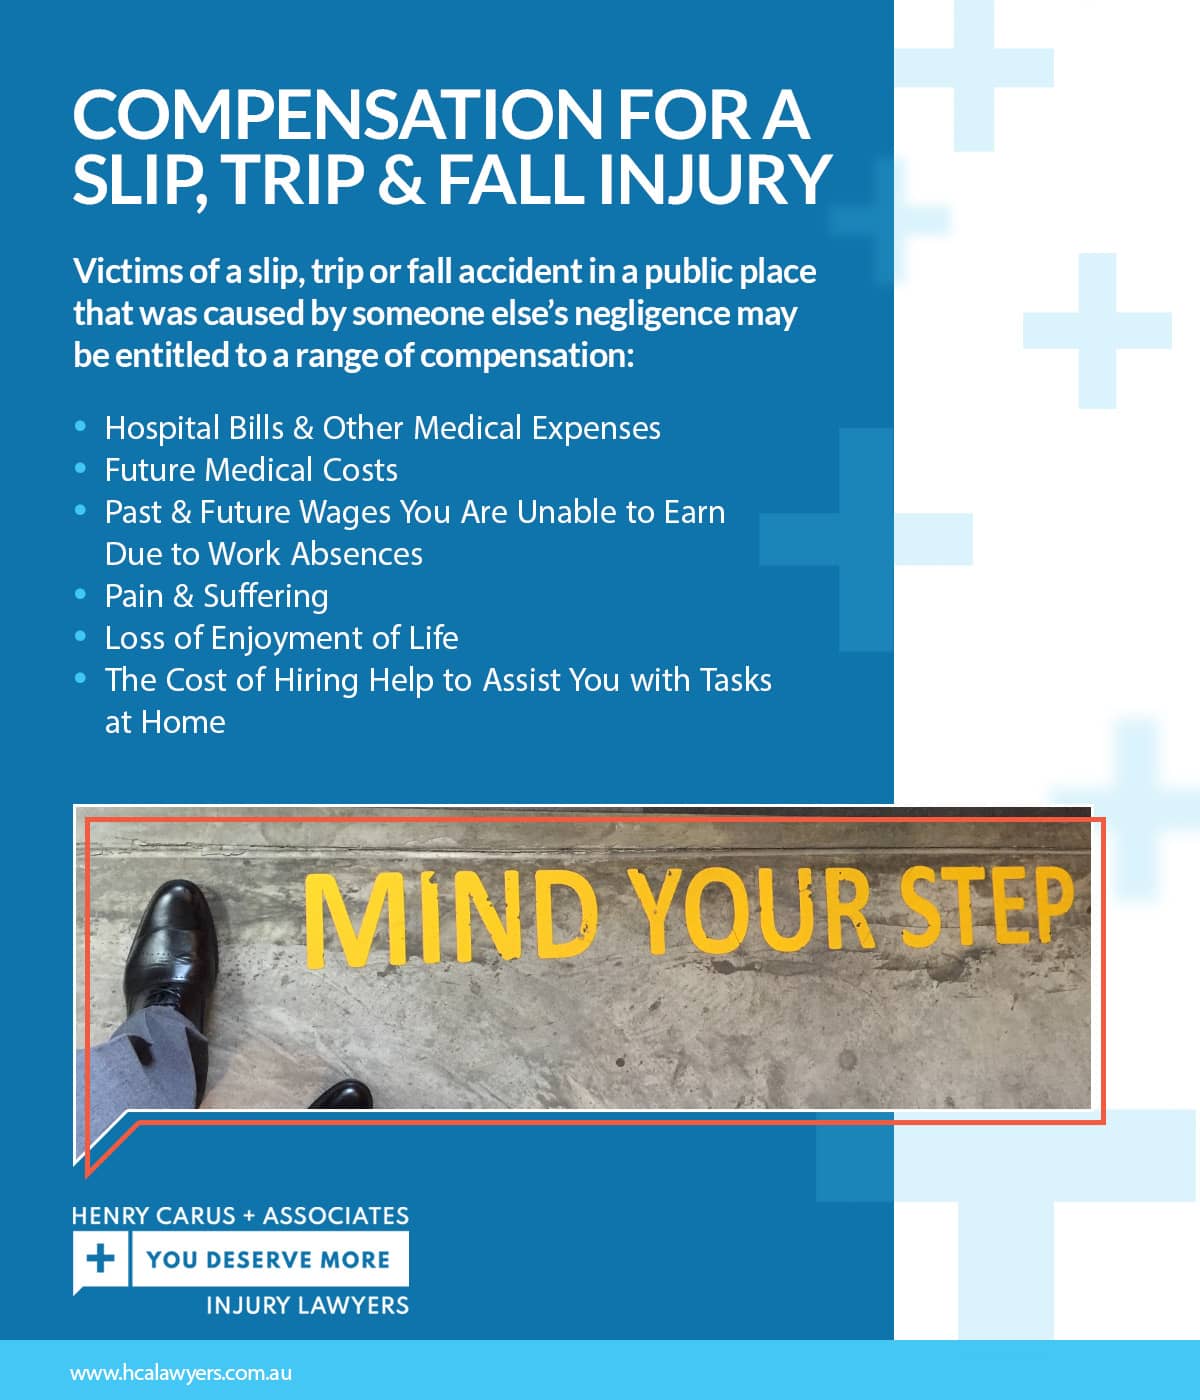 Compensation for a slip, trip & fall injury | Henry Carus + Associates